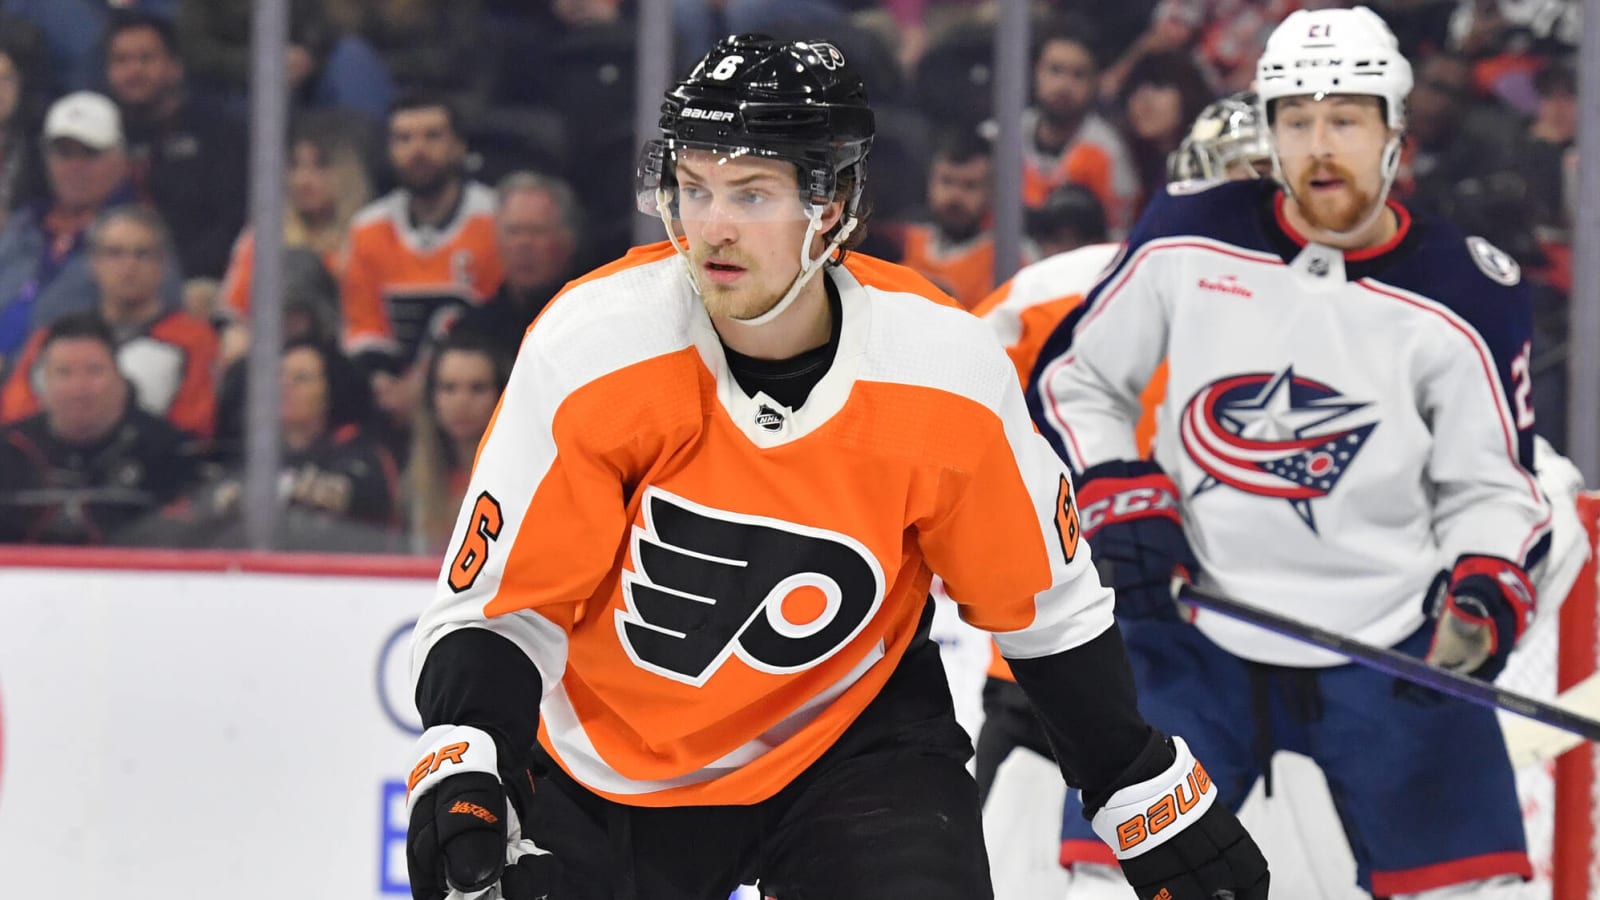 Jets Made a Mistake Not Trading for Sanheim